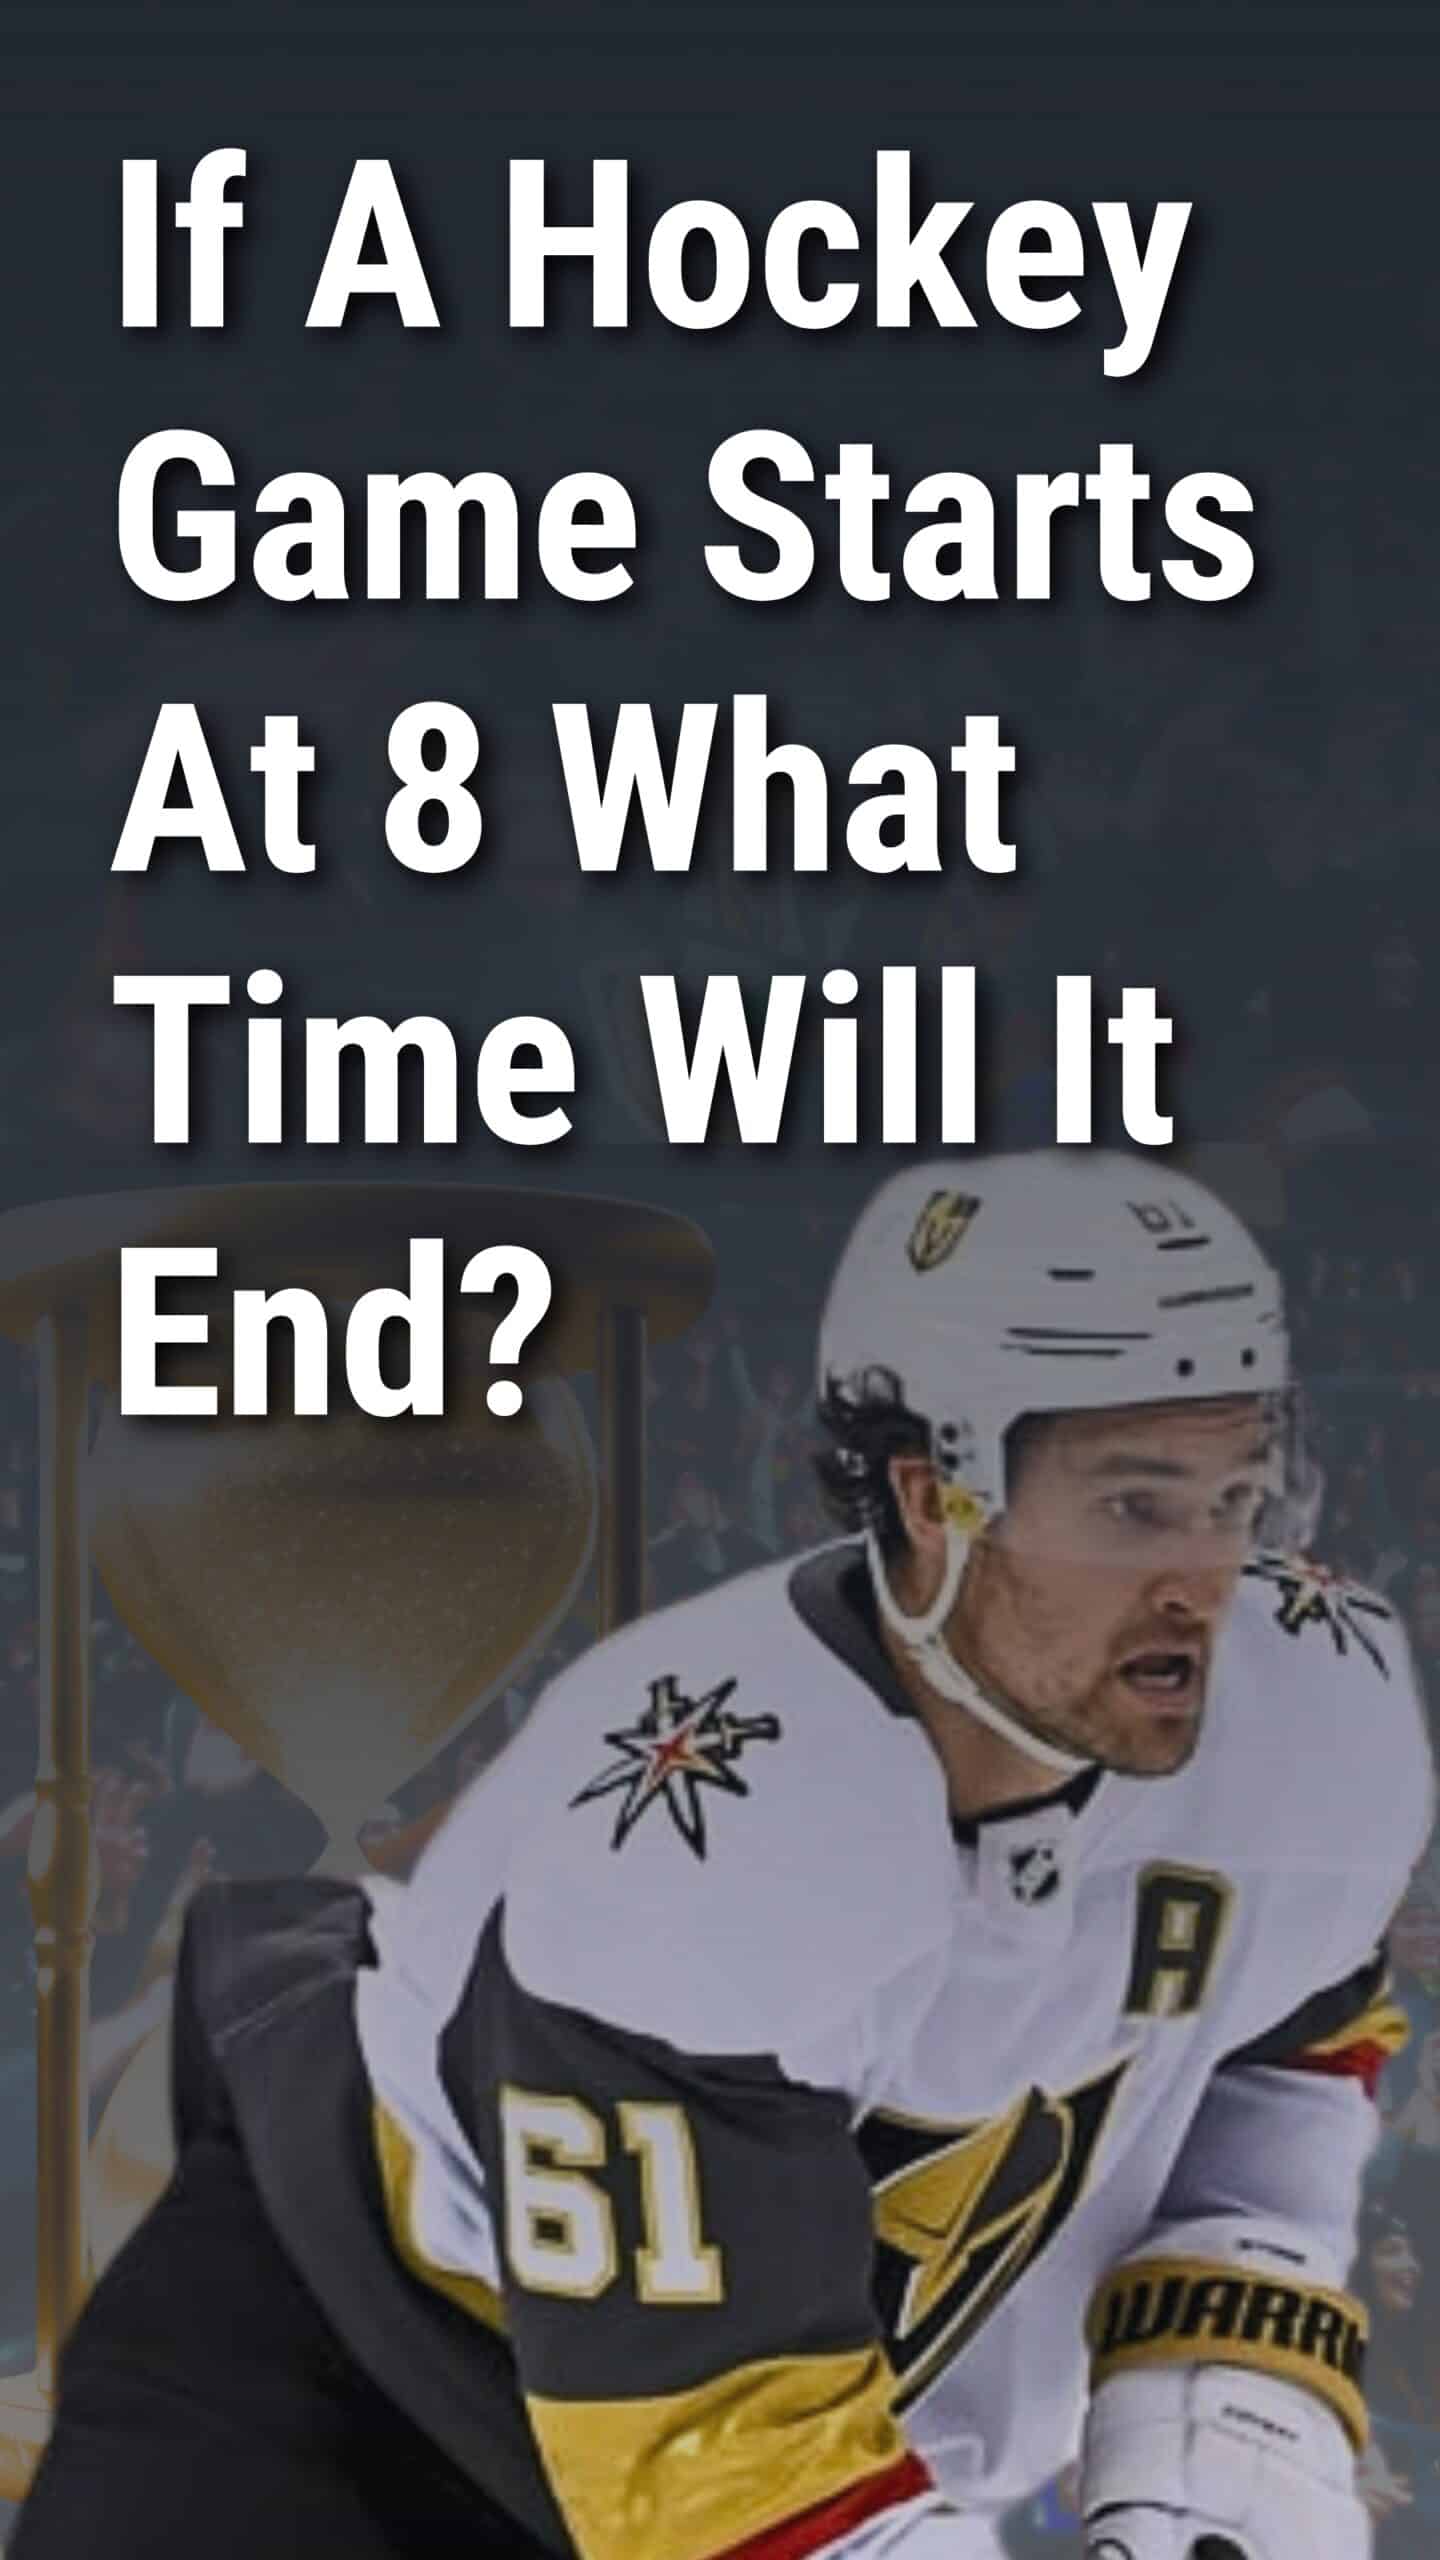 If A Hockey Game Starts At 8 What Time Will It End?